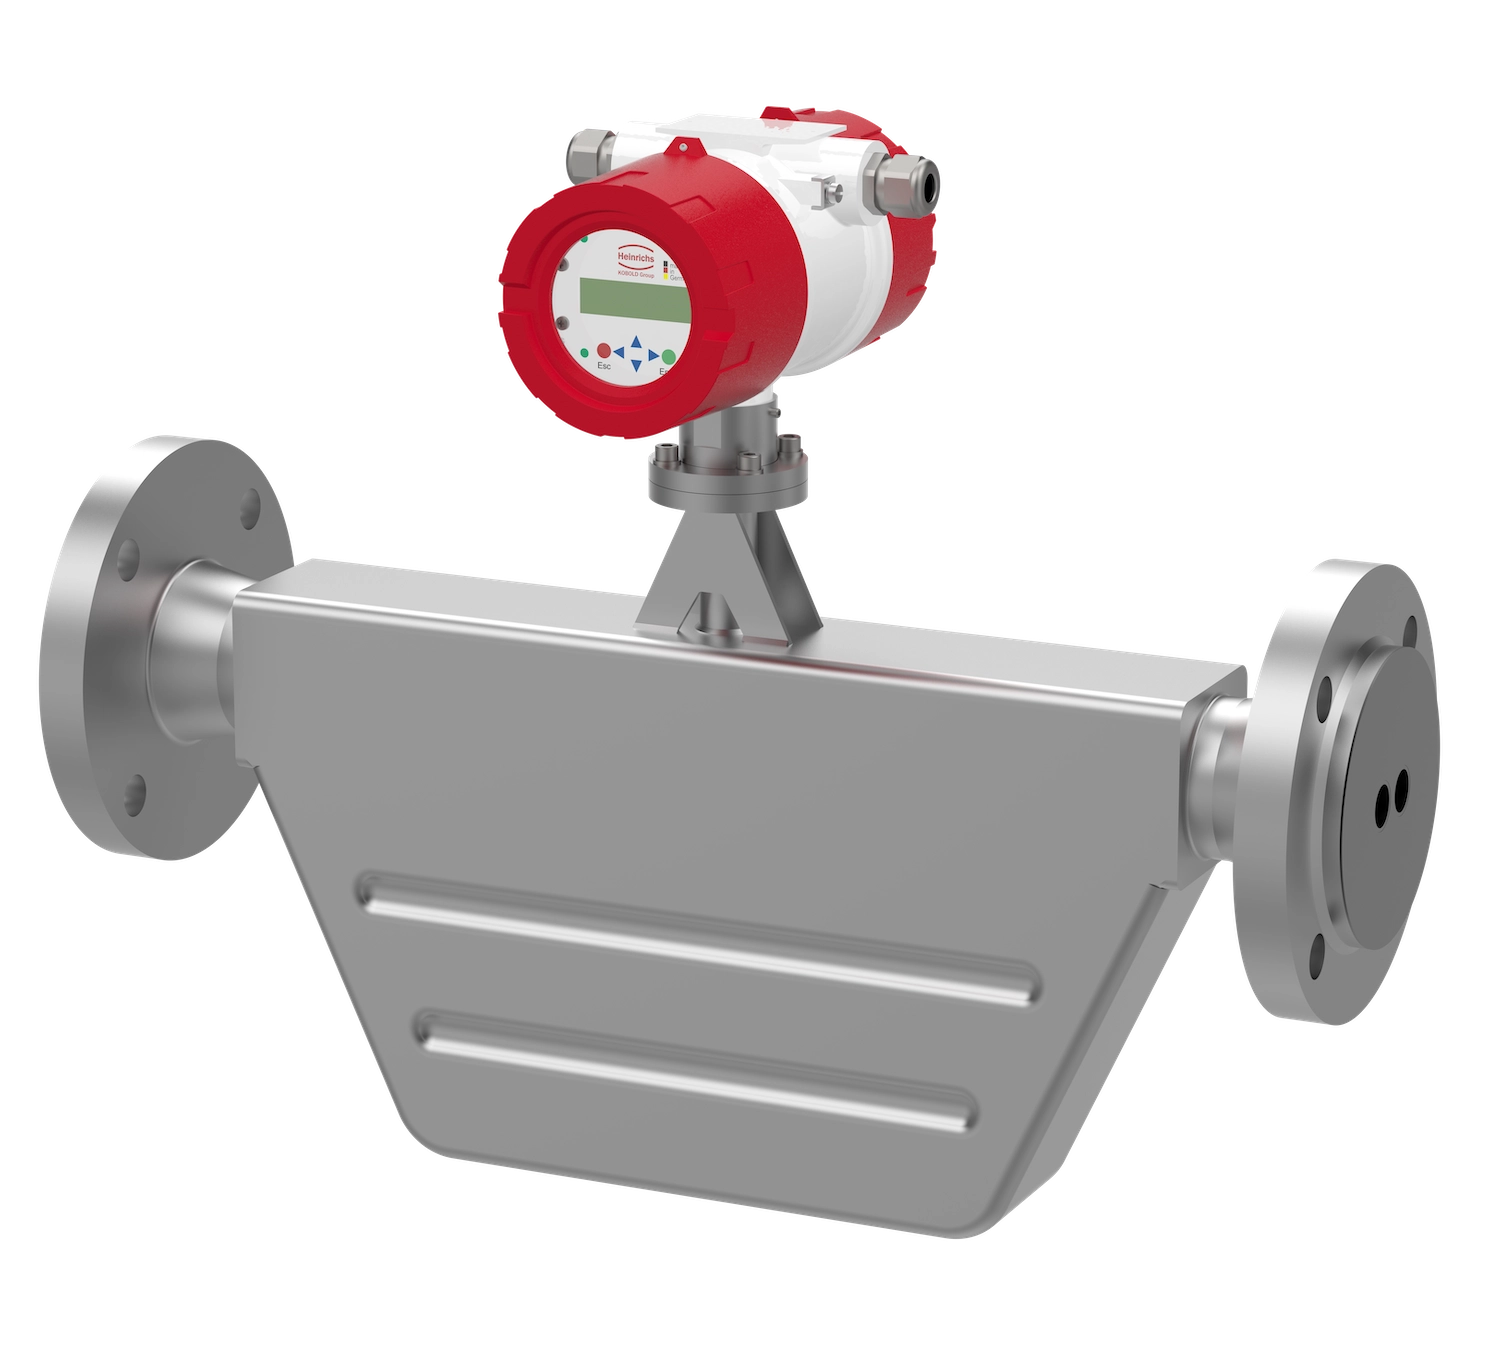 The ideal flow meter for oil and gas, petrochemical, and chemical industries.